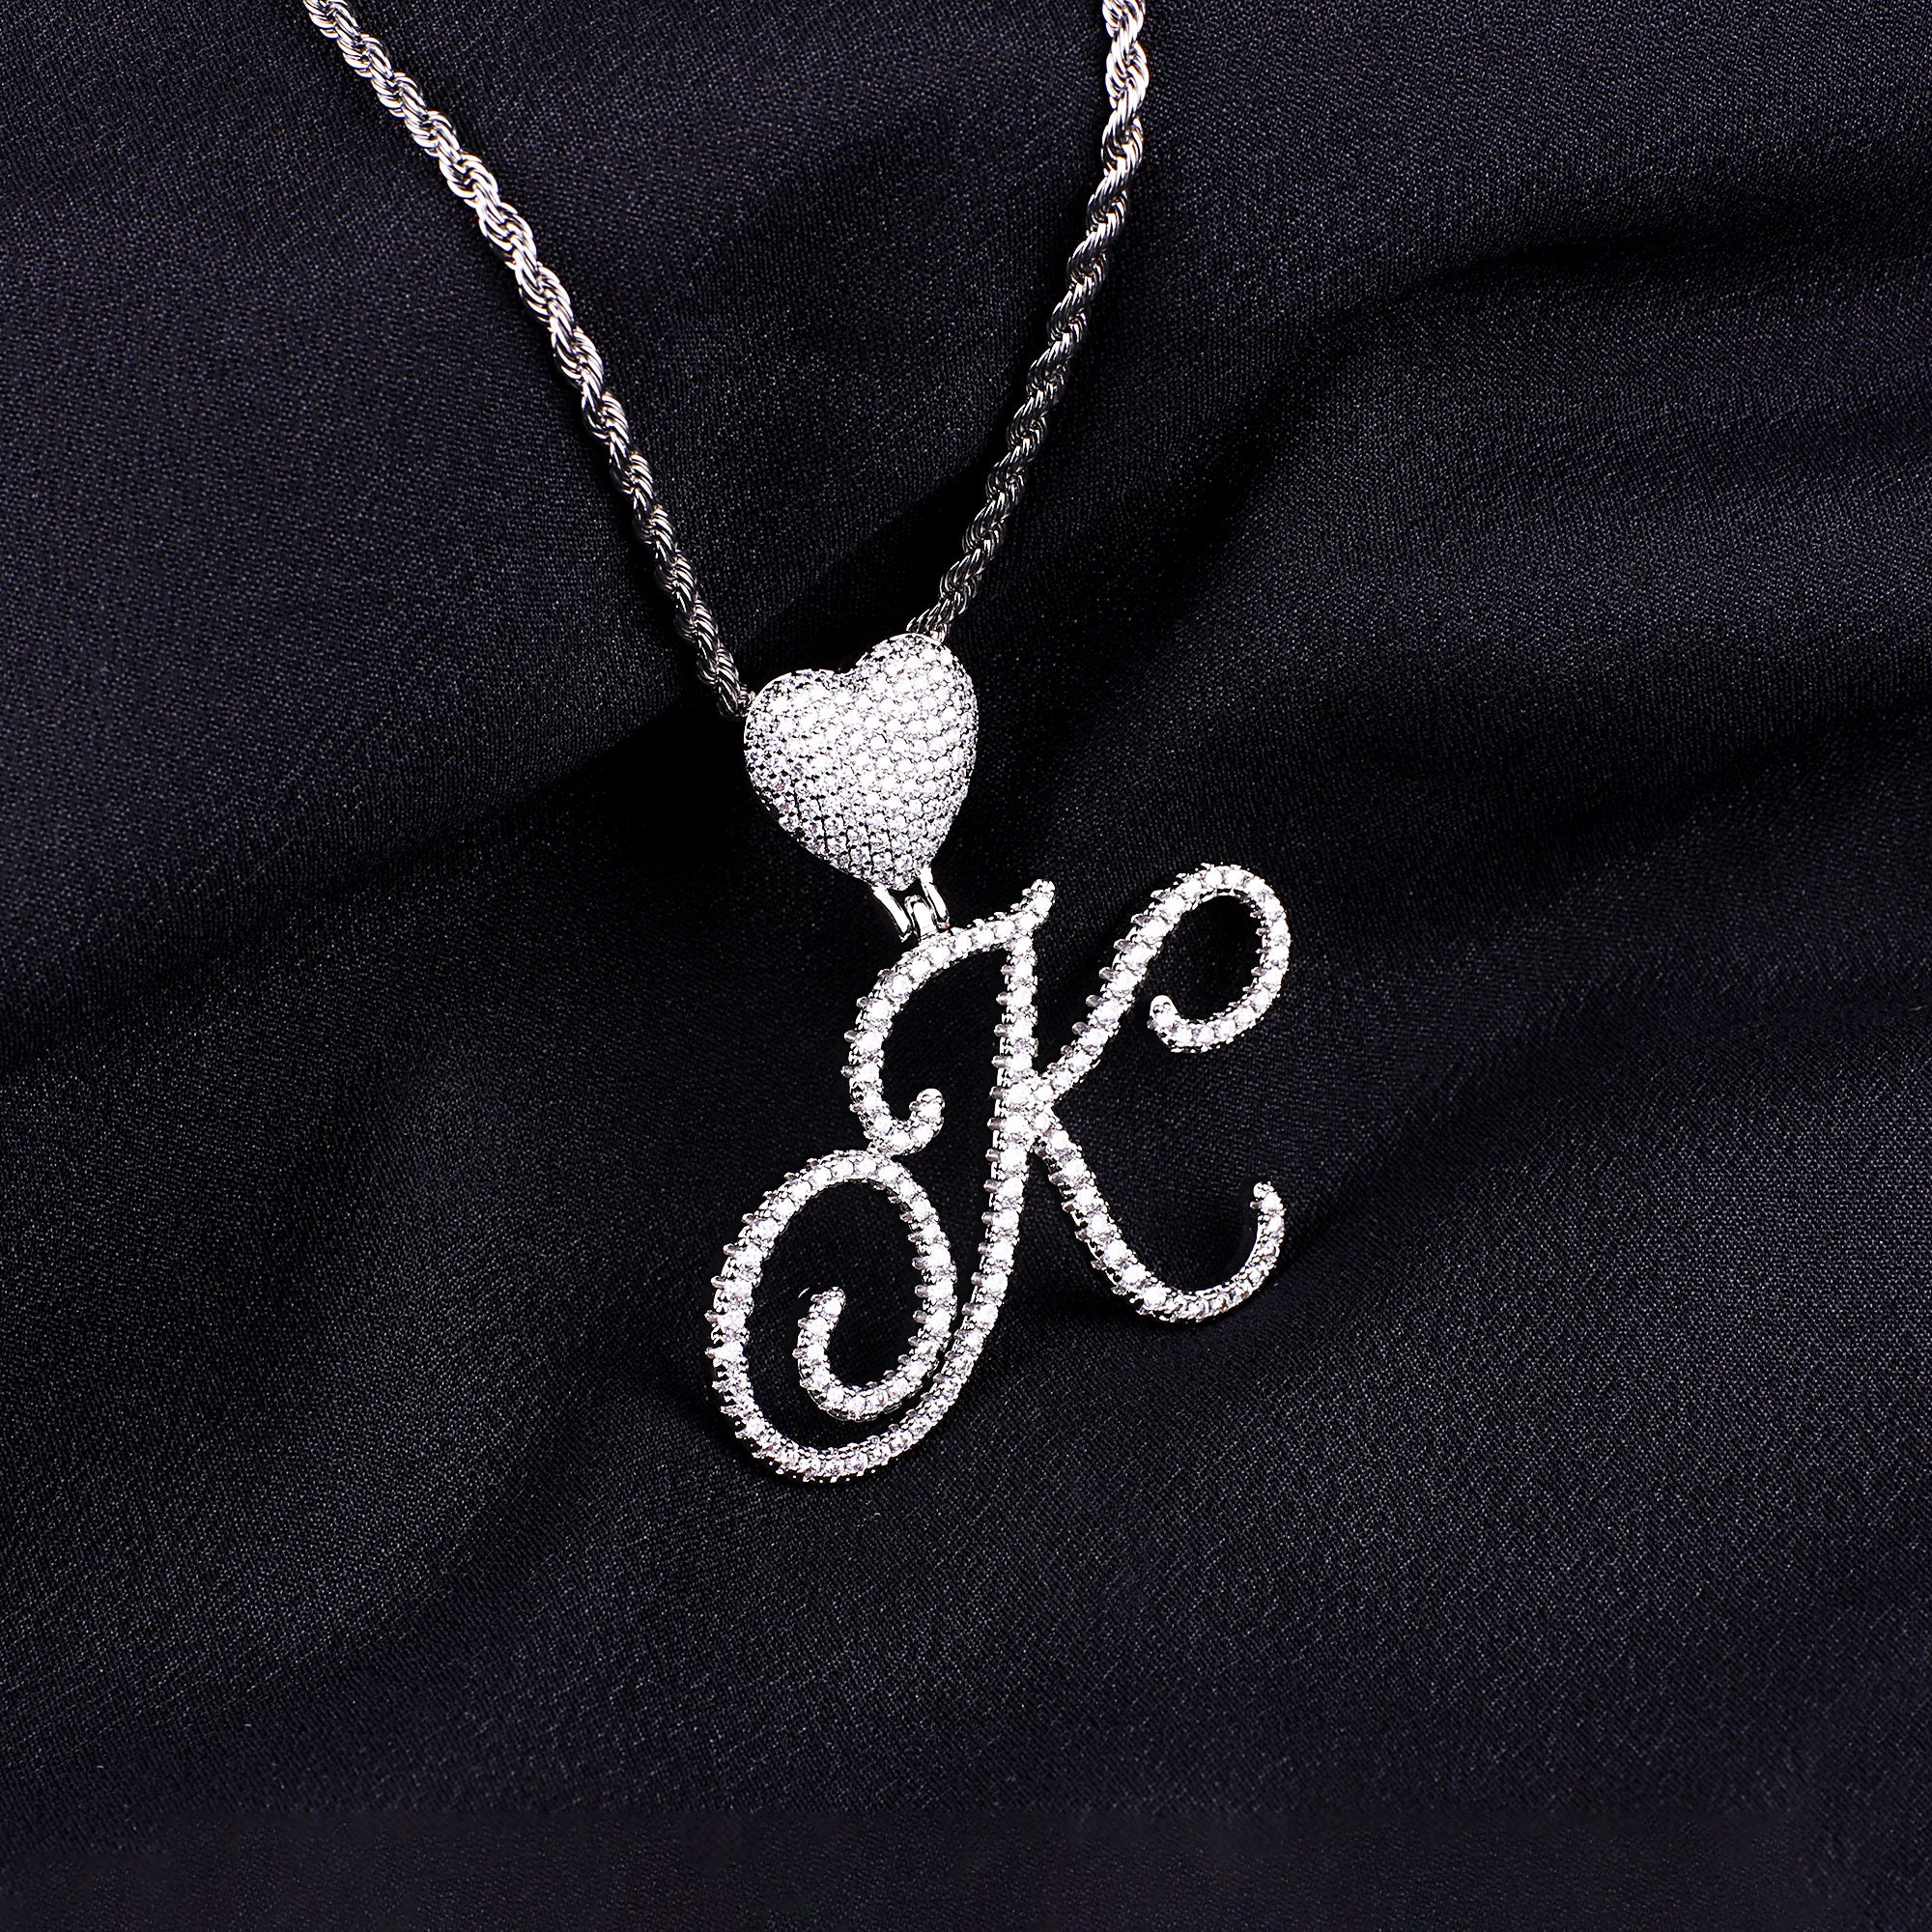 Iced Out Zircon Heart Diamond Heart Pendant Necklace Elegant Silver Y2K  Style Magnetic Necklaces For Women 230908 From Ren03, $8.57